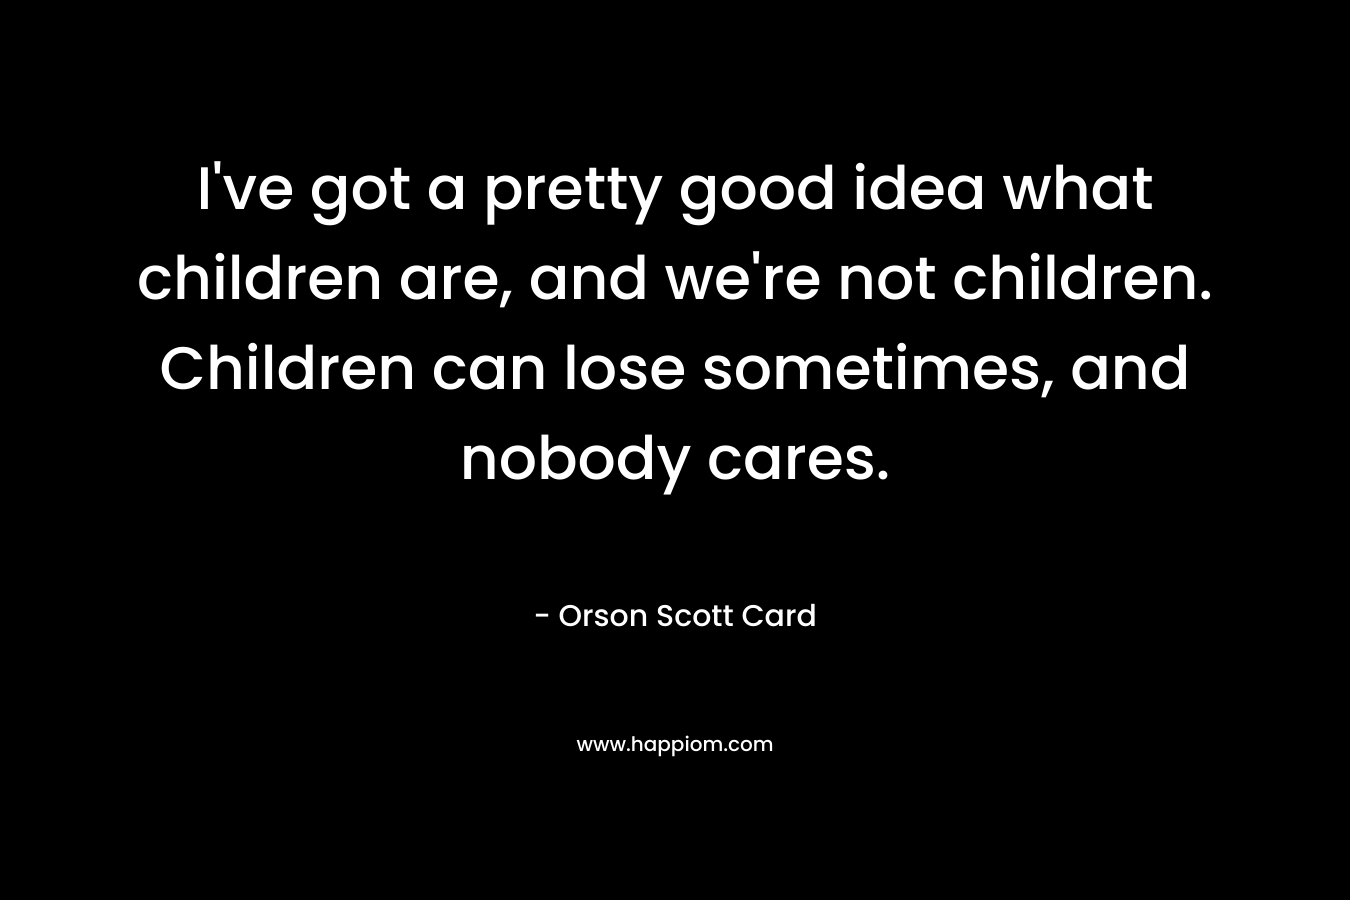 I've got a pretty good idea what children are, and we're not children. Children can lose sometimes, and nobody cares.